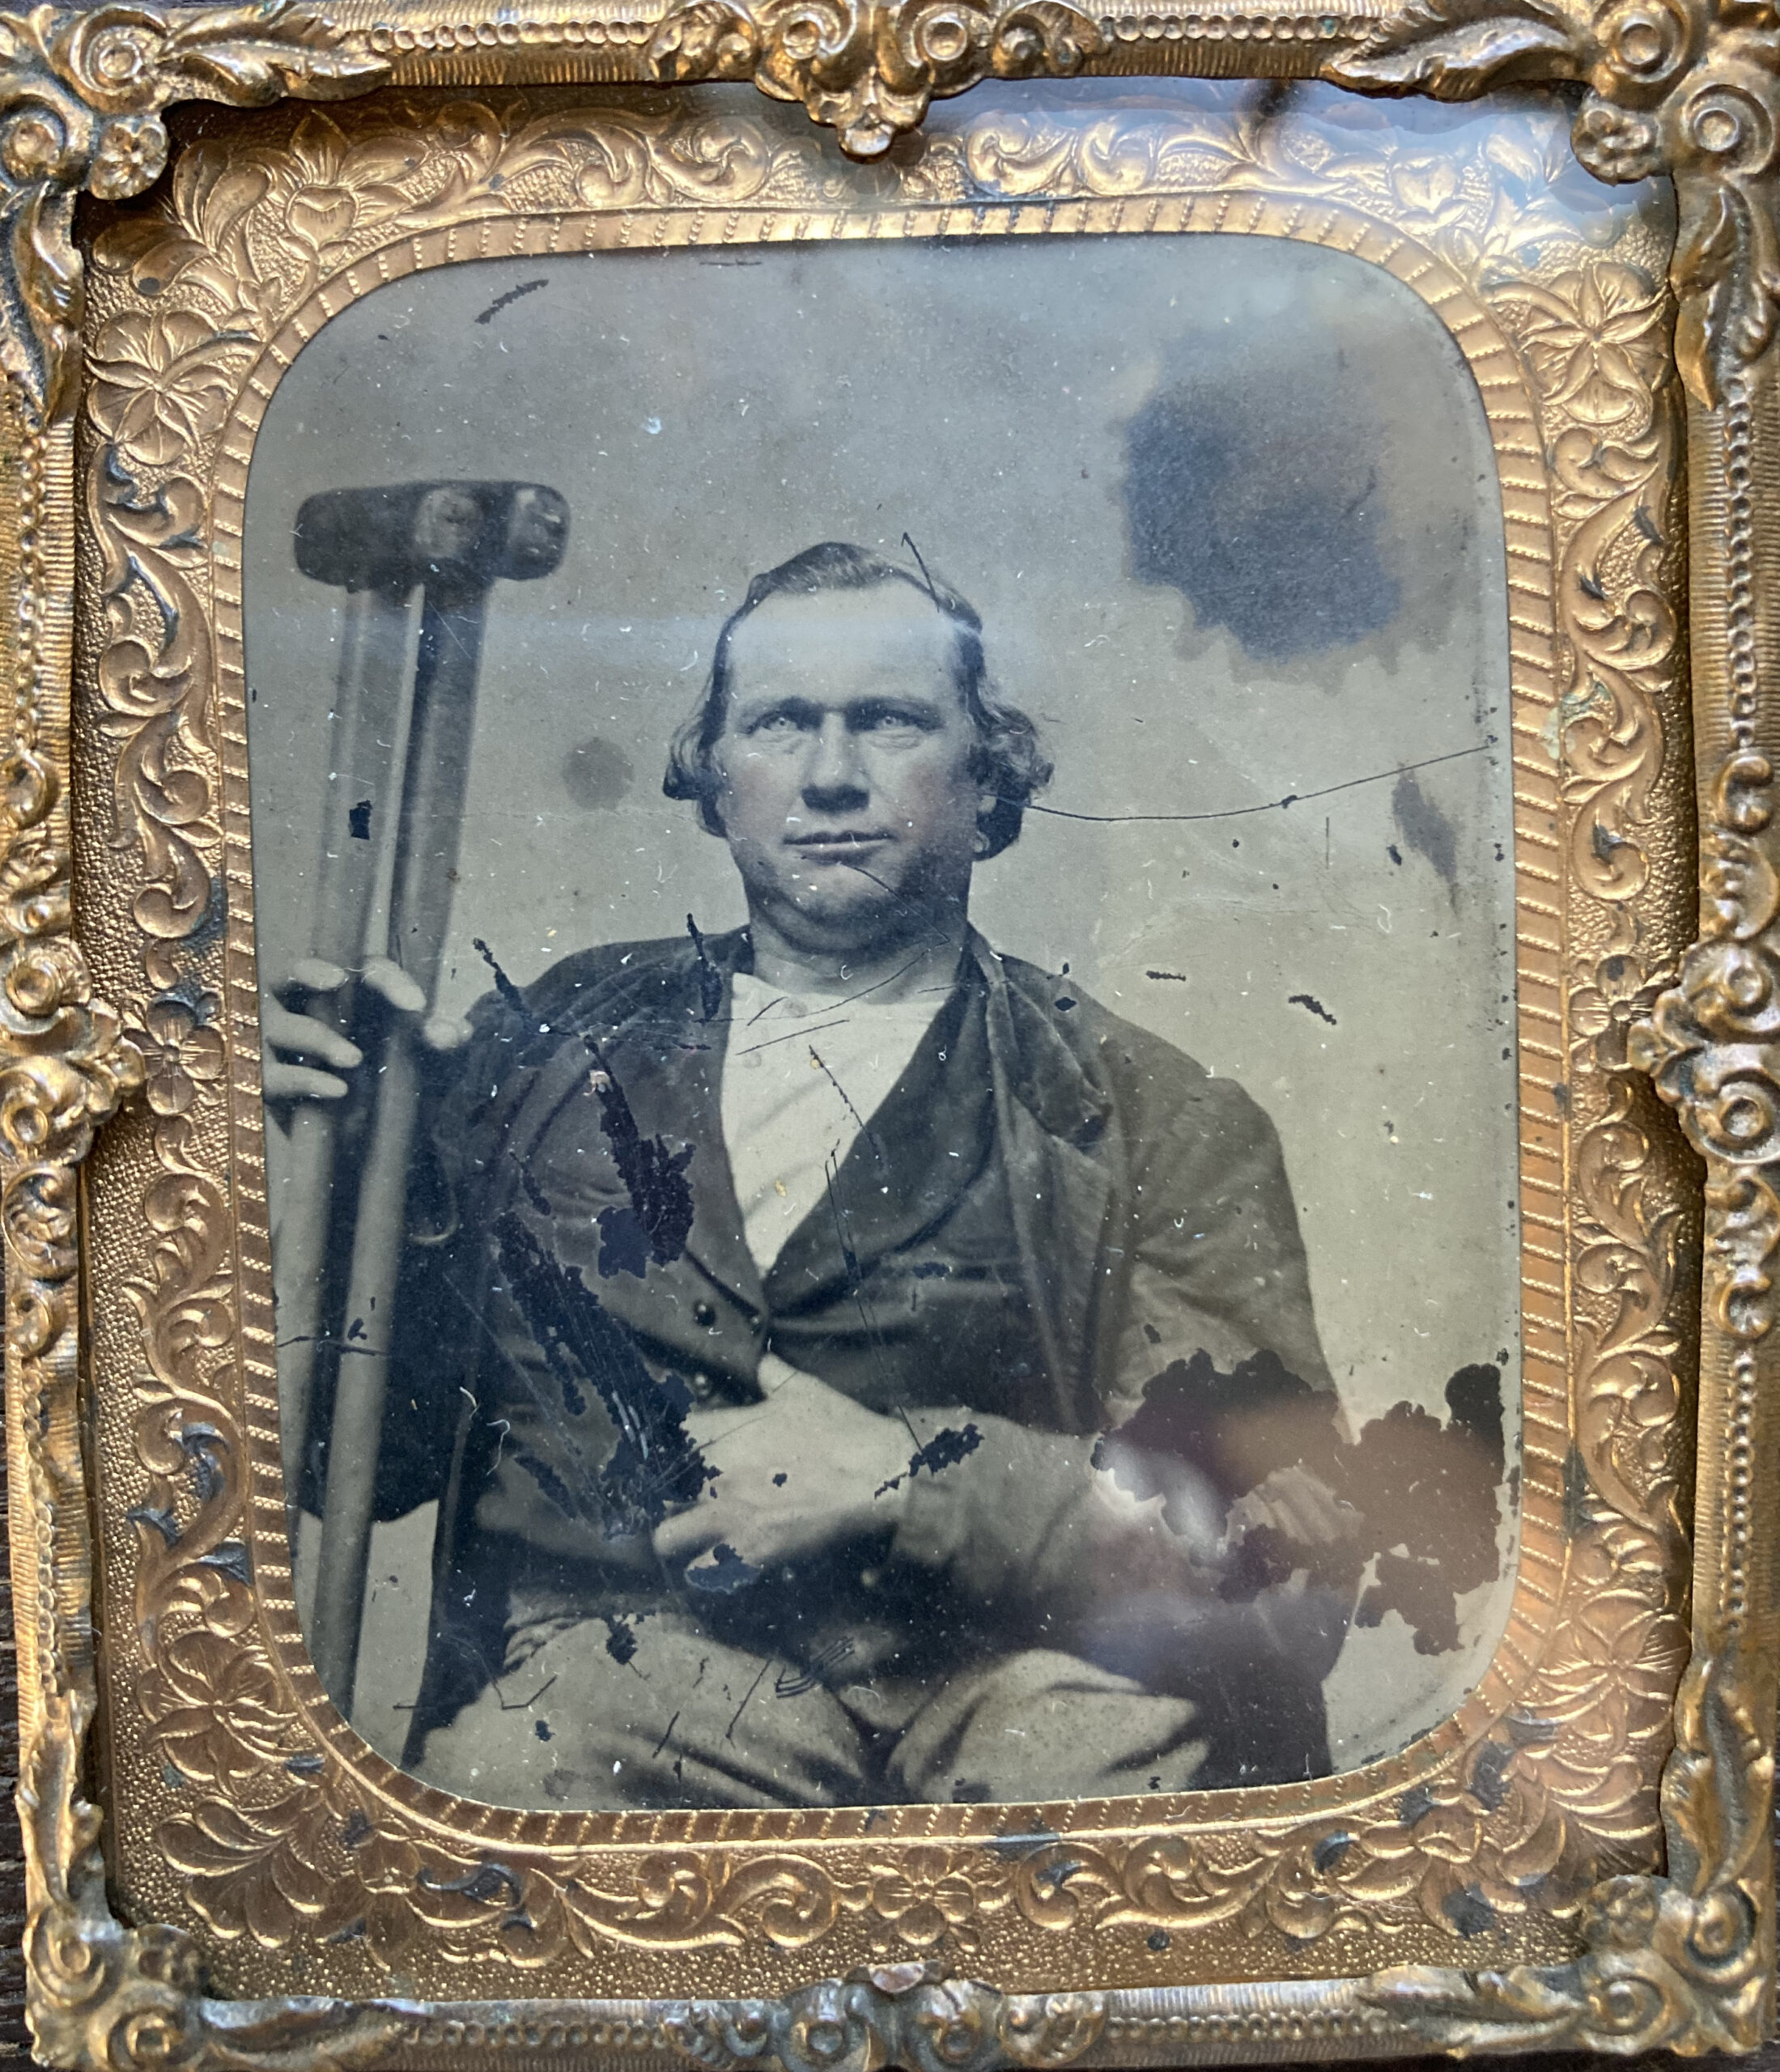 1860s tintype of a man in a gold frame. Man is seated, holding two crutches in his right hand. Left hand tucked into coat. Cheeks tinted pink.